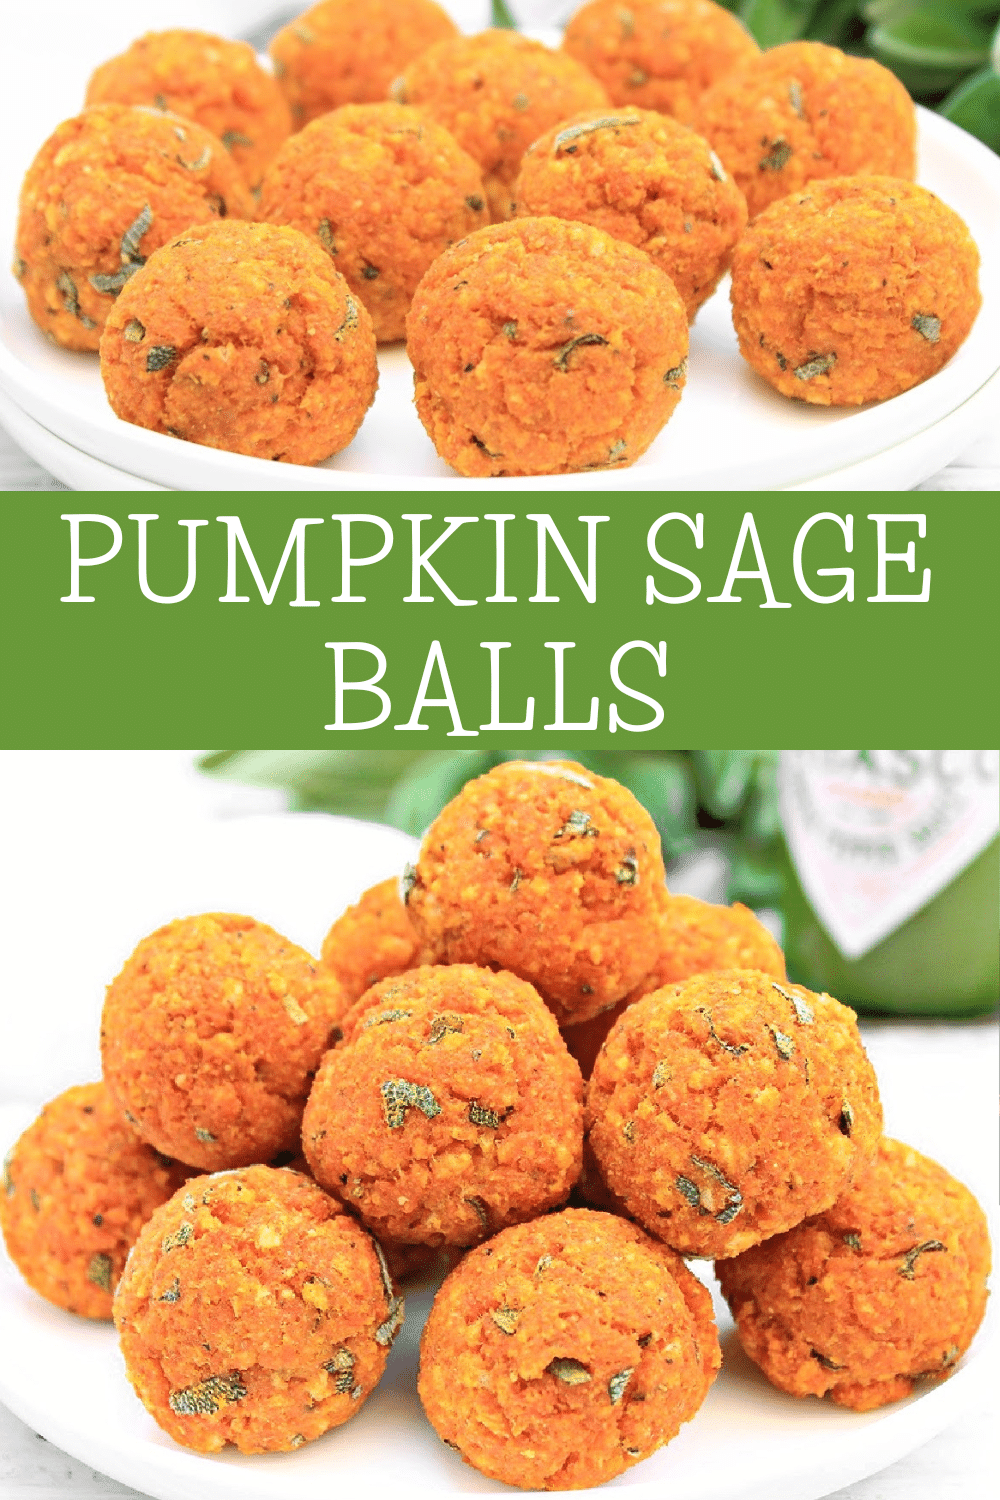 Pumpkin Sage Balls ~ Easy baked appetizer bites packed with fall flavors! Make a day in advance and serve as a Thanksgiving Day snack! via @thiswifecooks